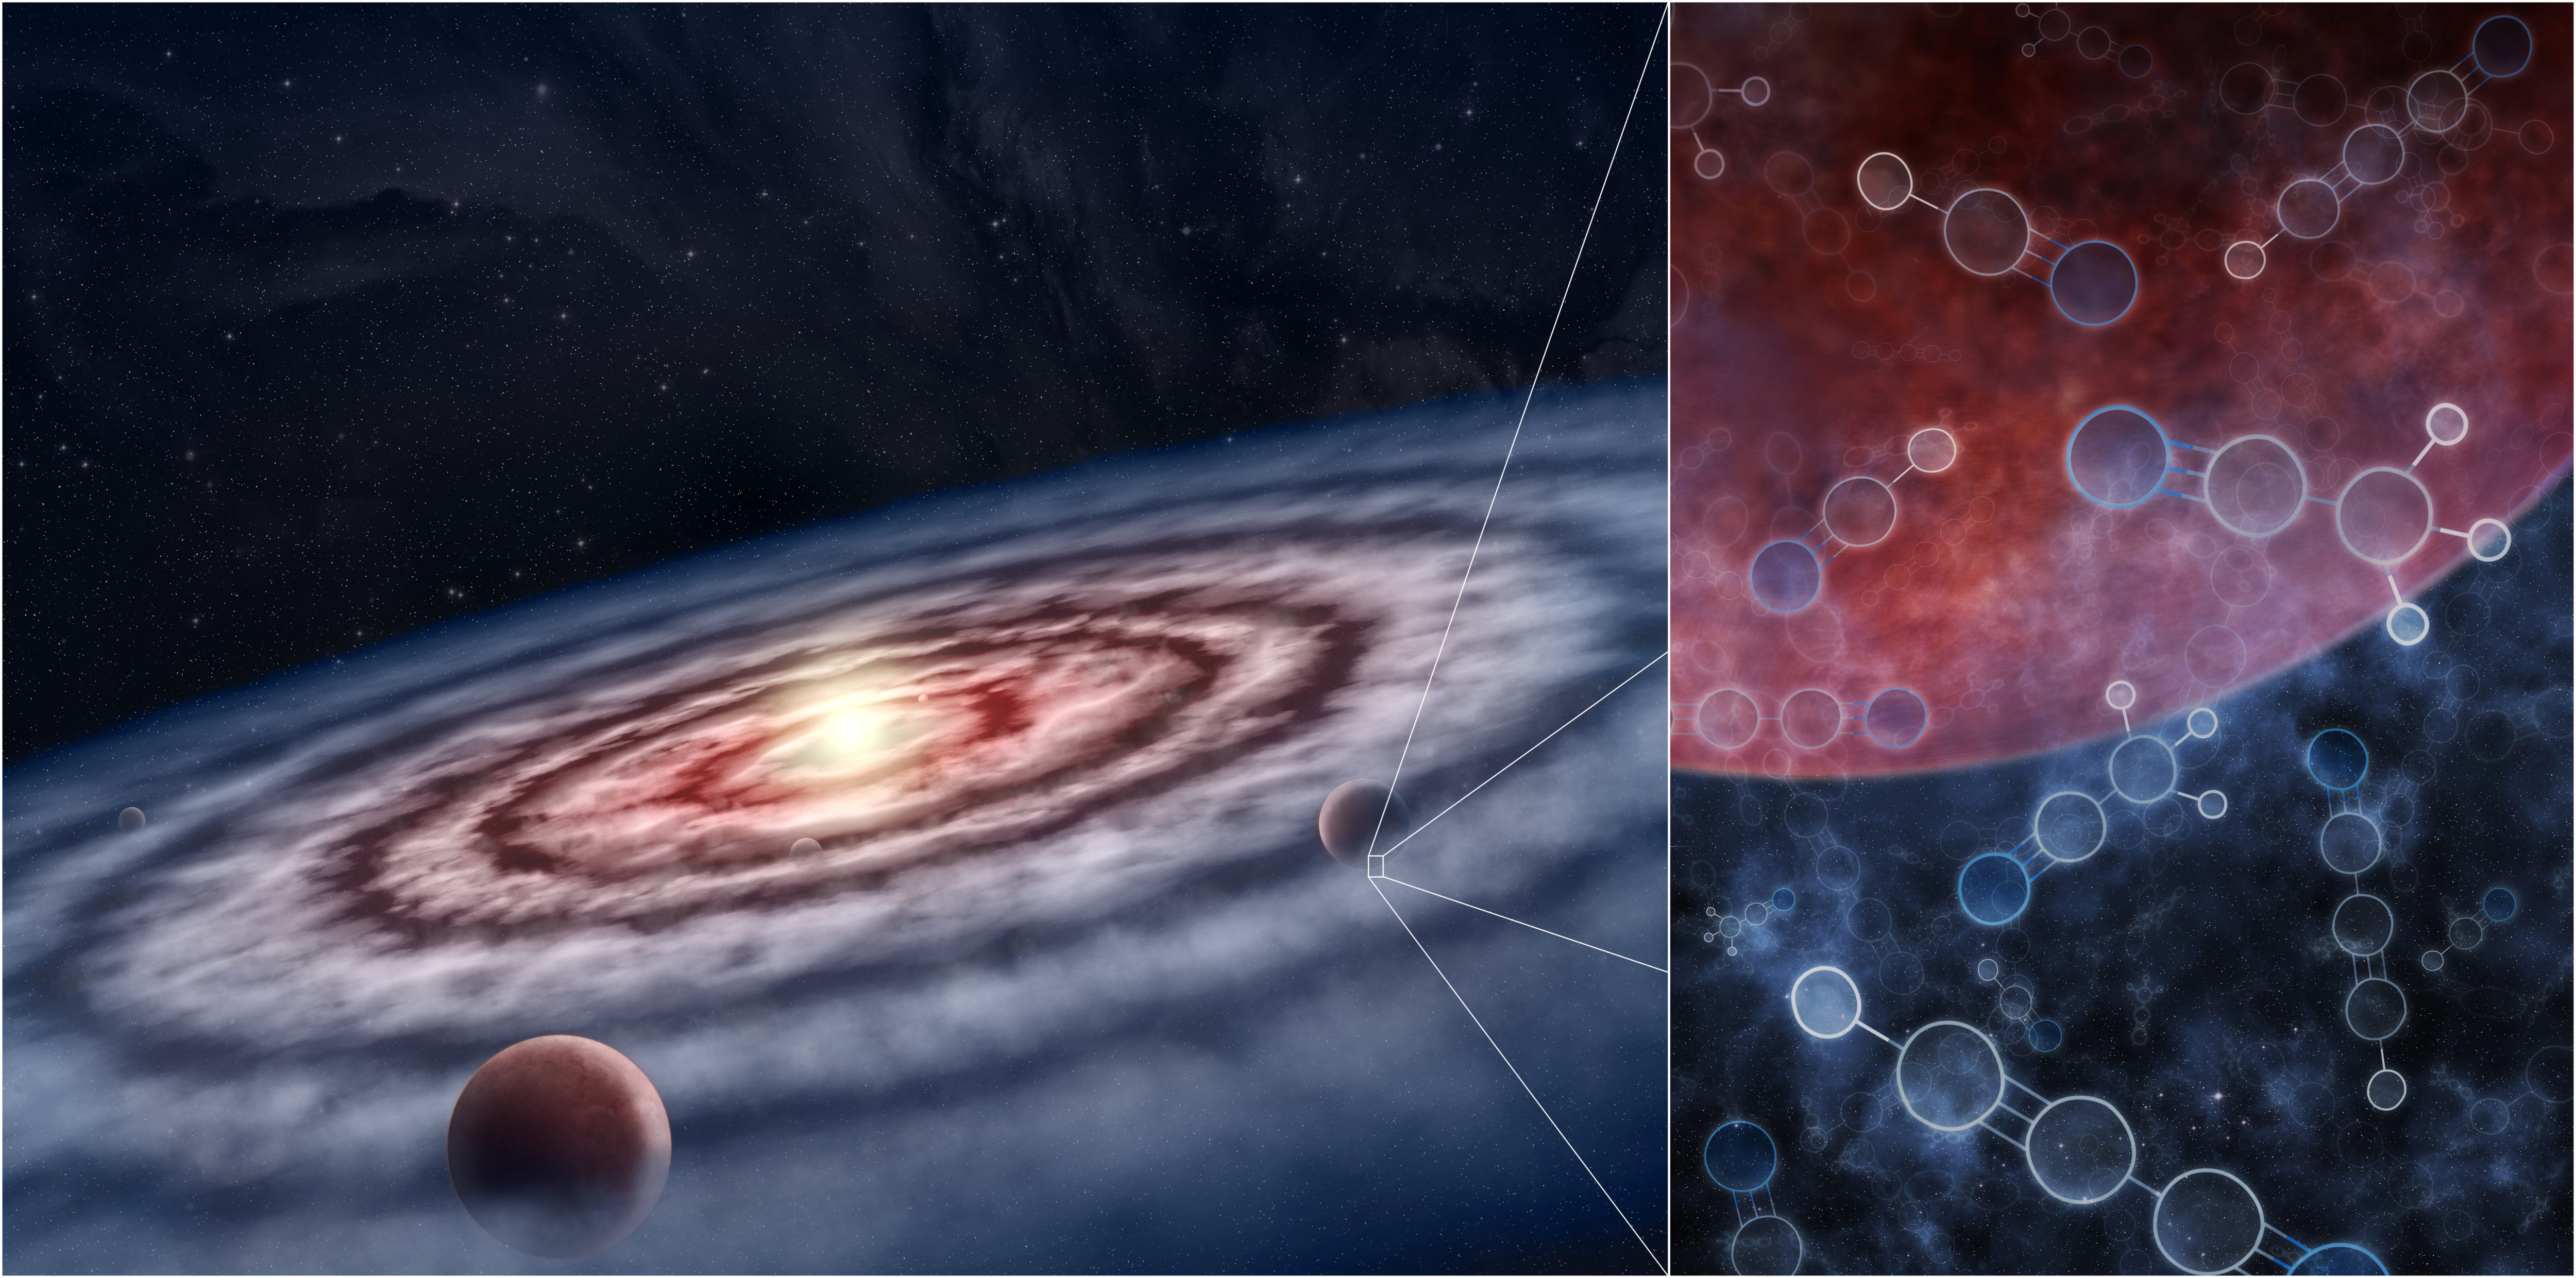 In this artist's conception, planets form from the gas and dust in the protoplanetary disk surrounding the young star. The gas is made up of many different molecules, including hydrogen cyanide and more complex nitriles—linked to the development of life on Earth—and other organic and inorganic compounds. From simple organic compounds to the more complex, the soup of molecules in a particular location in the disk shapes the future of the planet forming there, and determines whether or not that planet could support life as we know it. Credit: M.Weiss/Center for Astrophysics | Harvard & Smithsonian